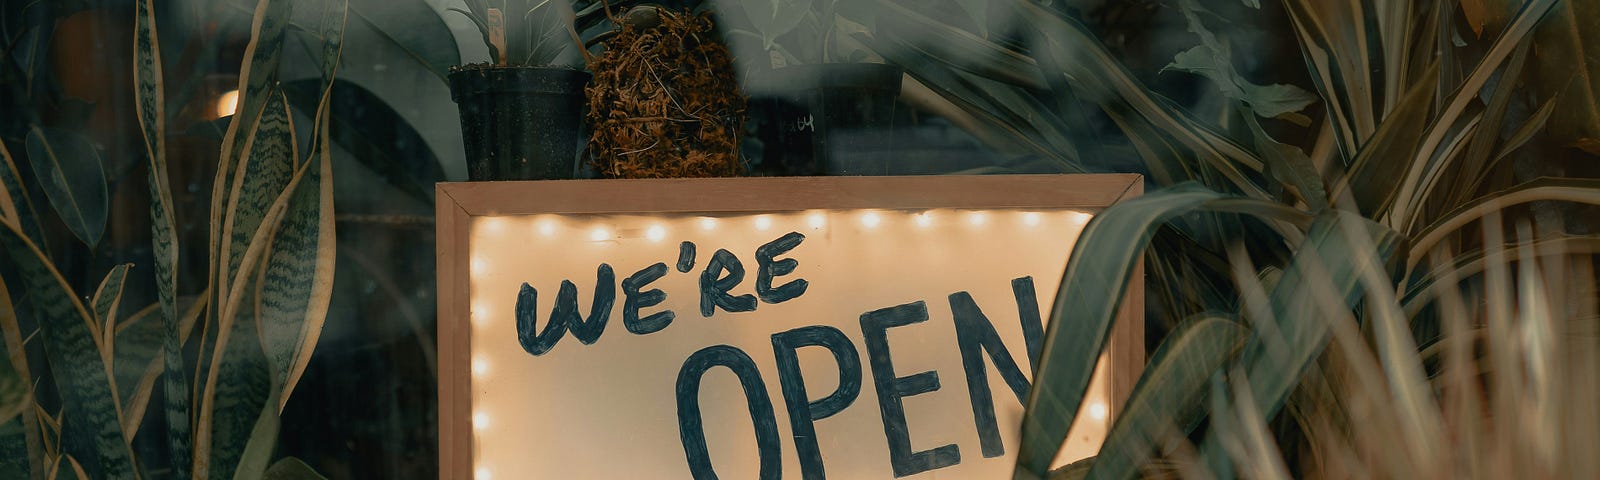 “We are open” sign in a shop window.